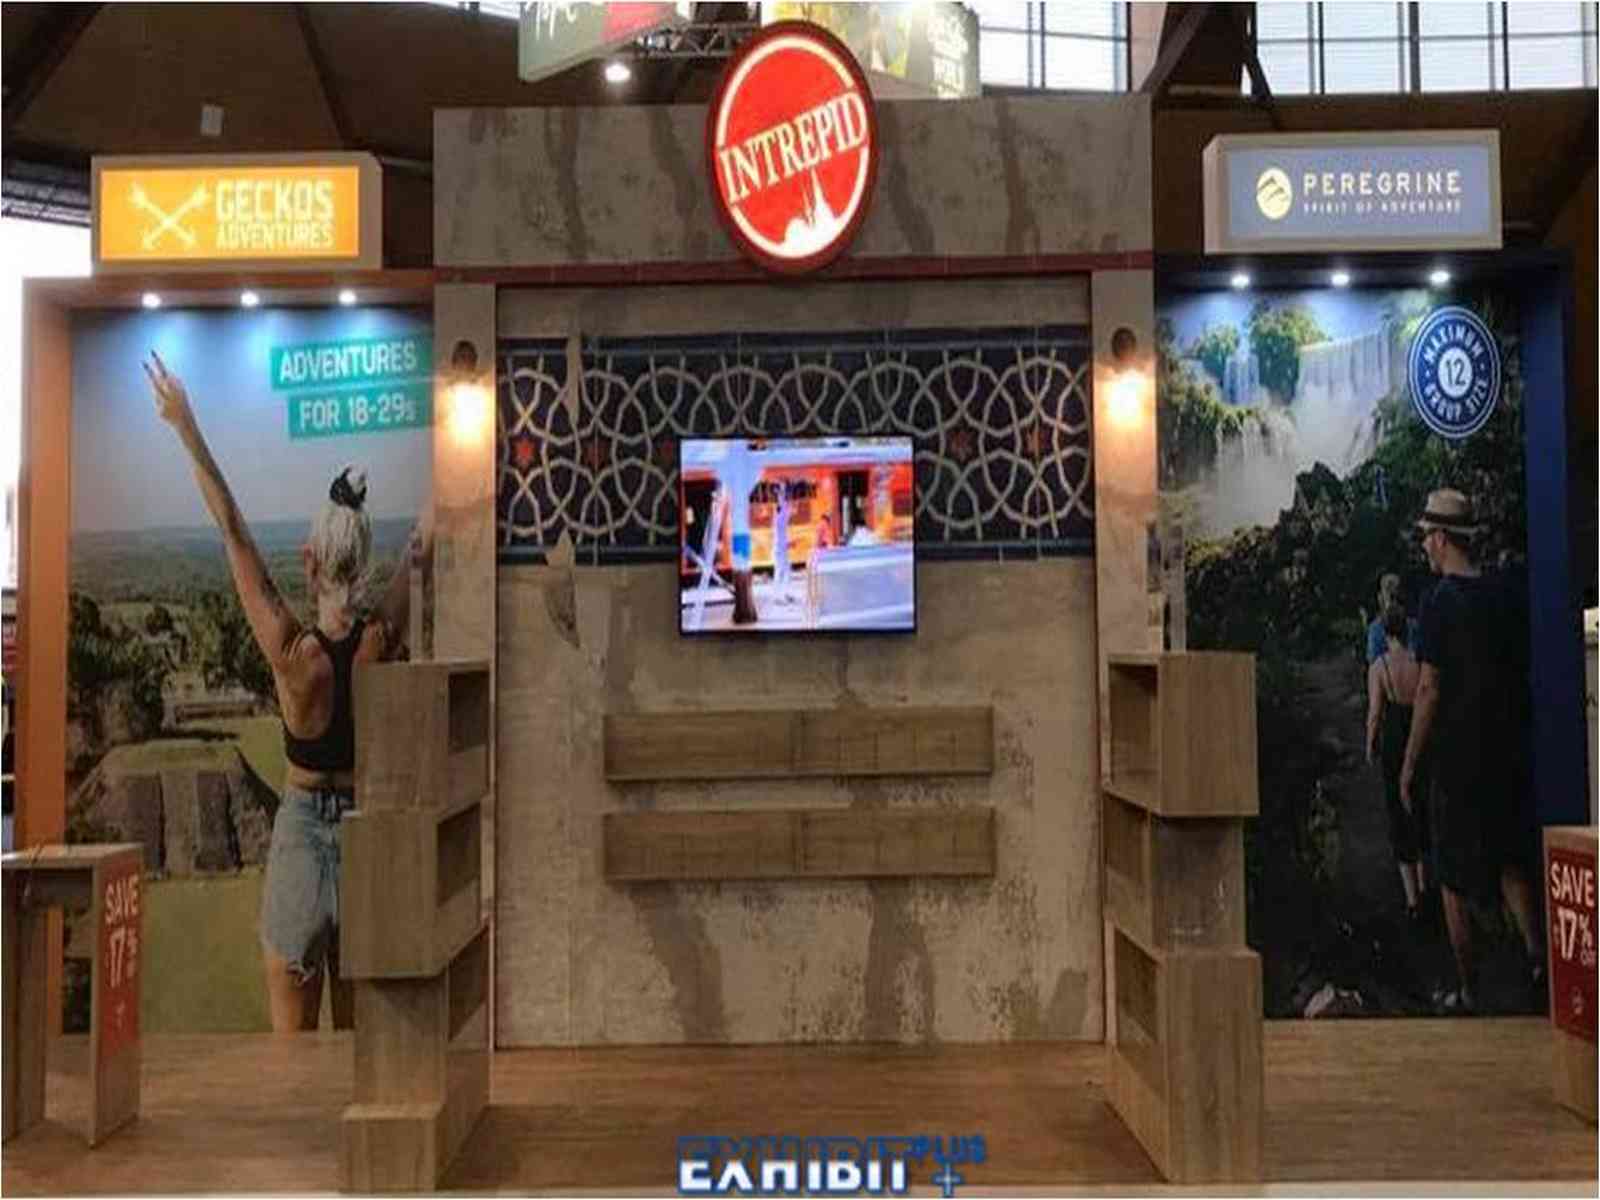 Trade Display Booth